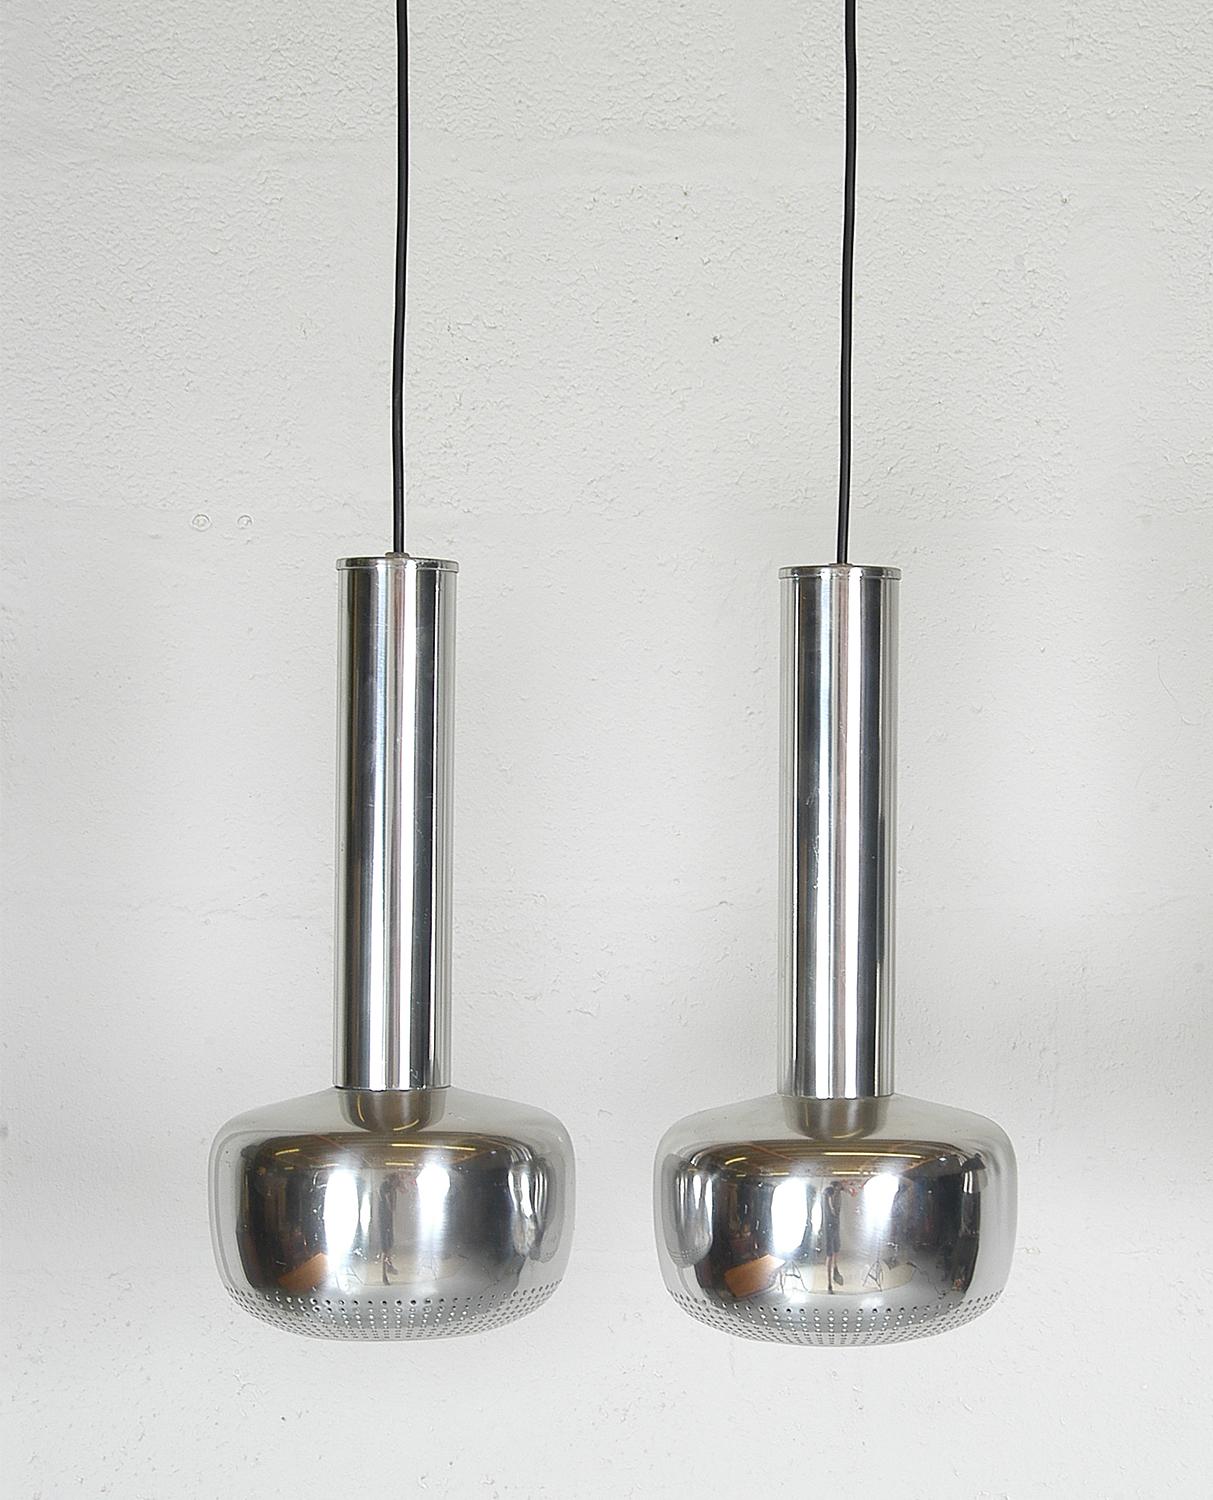 Rare pair of polished aluminium ‘Guldpendel’ ceiling pendants designed by architect Vilhelm Lauritzen for Danish lighting giant Louis Poulsen. 
Originally designed in 1956 for a government building in Copenhagen. The lamps are height adjustable as